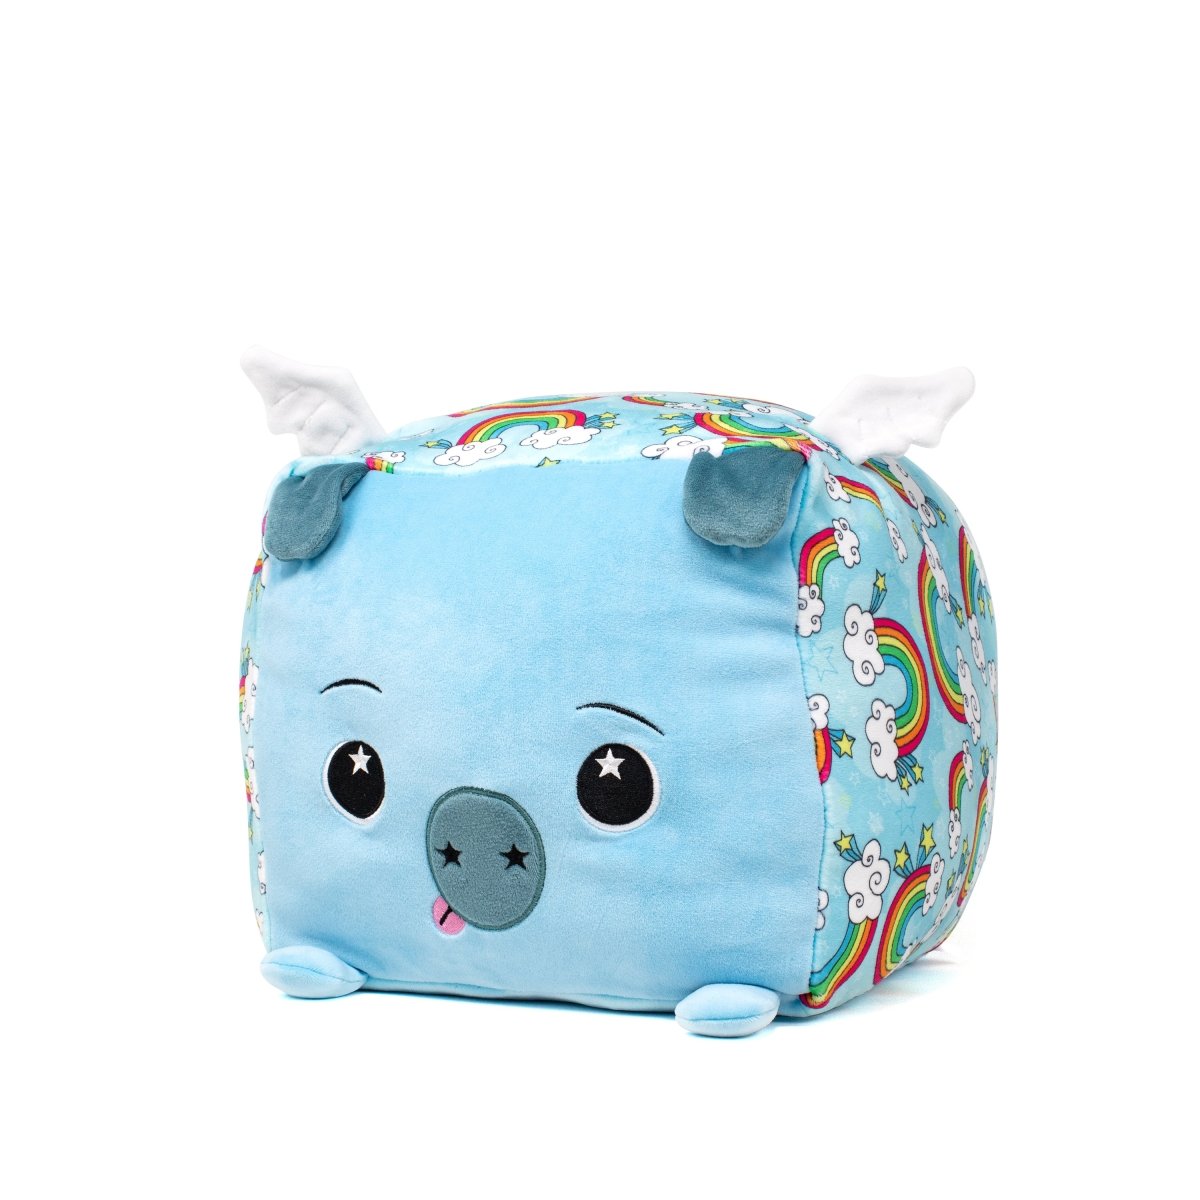 Augustus the Pig plush toy with sky-blue fur, wings, and playful expression from Moosh-Moosh SQUARED² Collection.